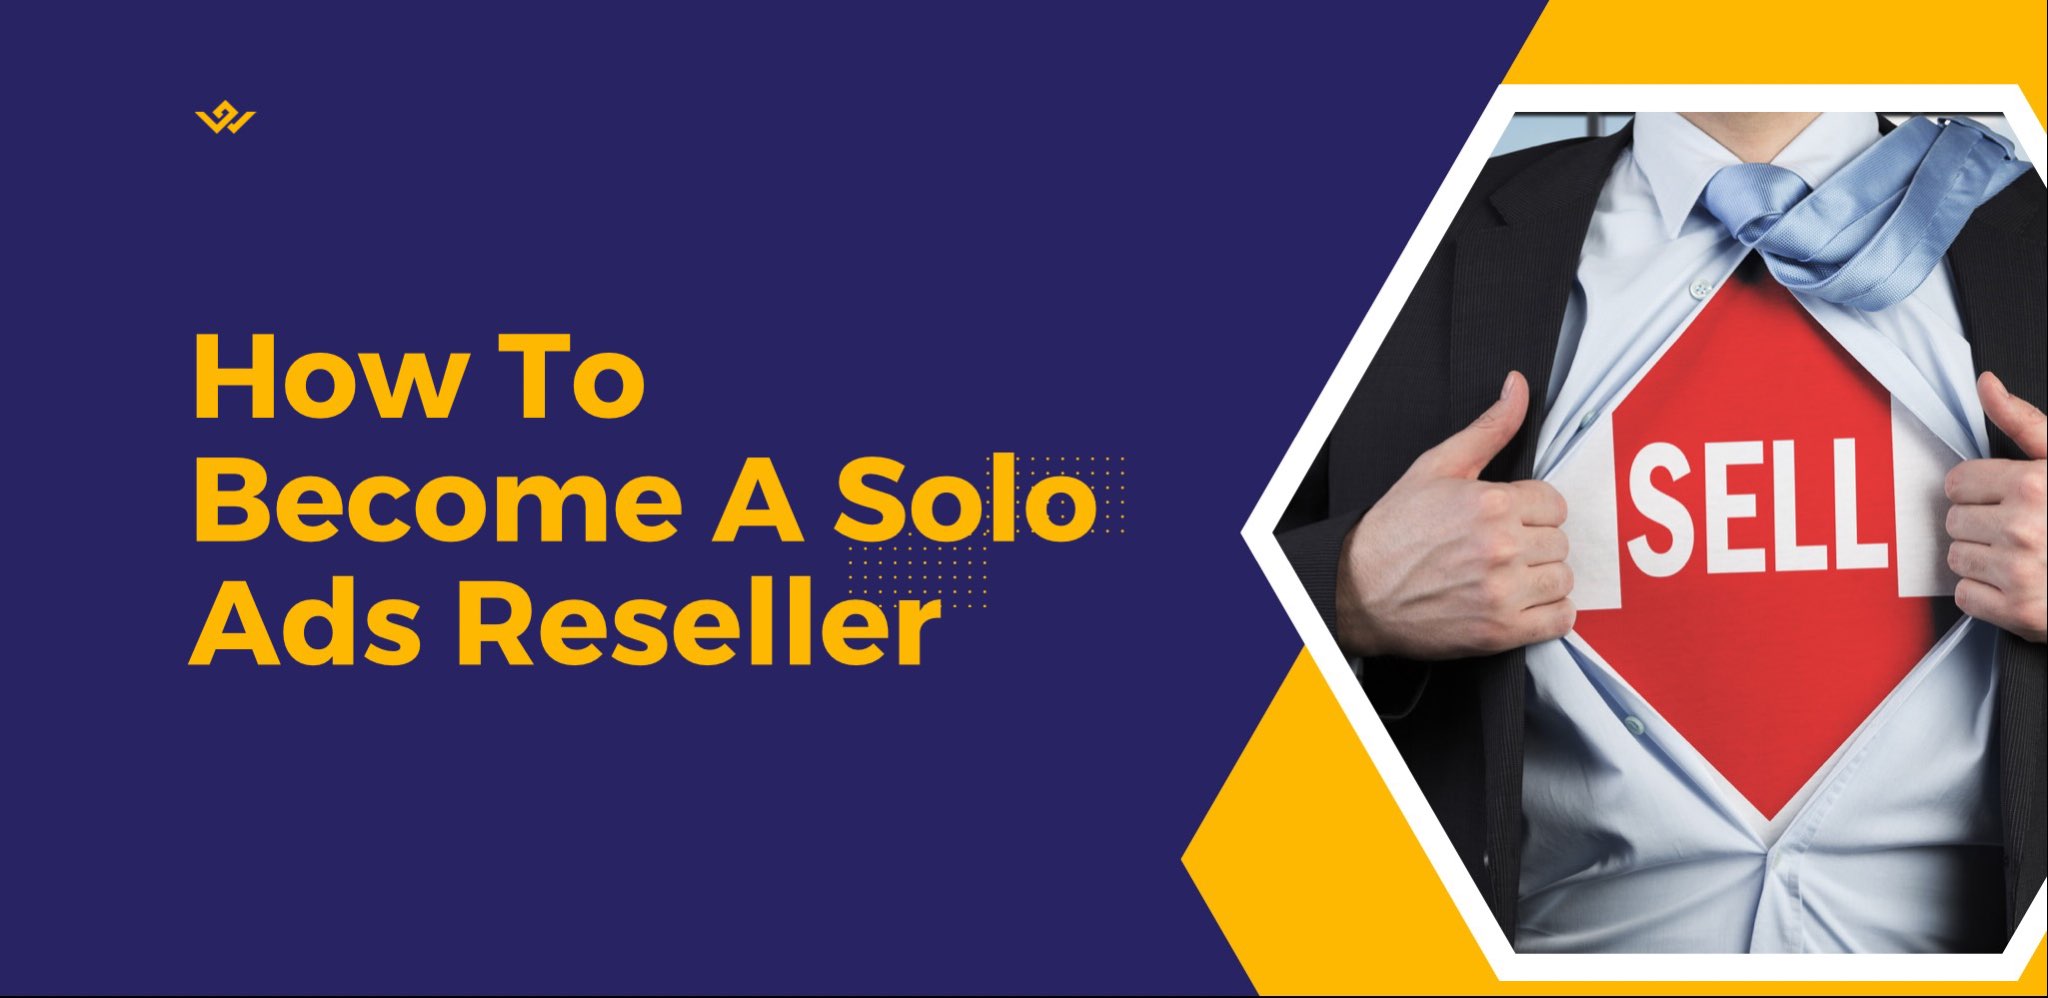 How To Become A Solo Ads Reseller